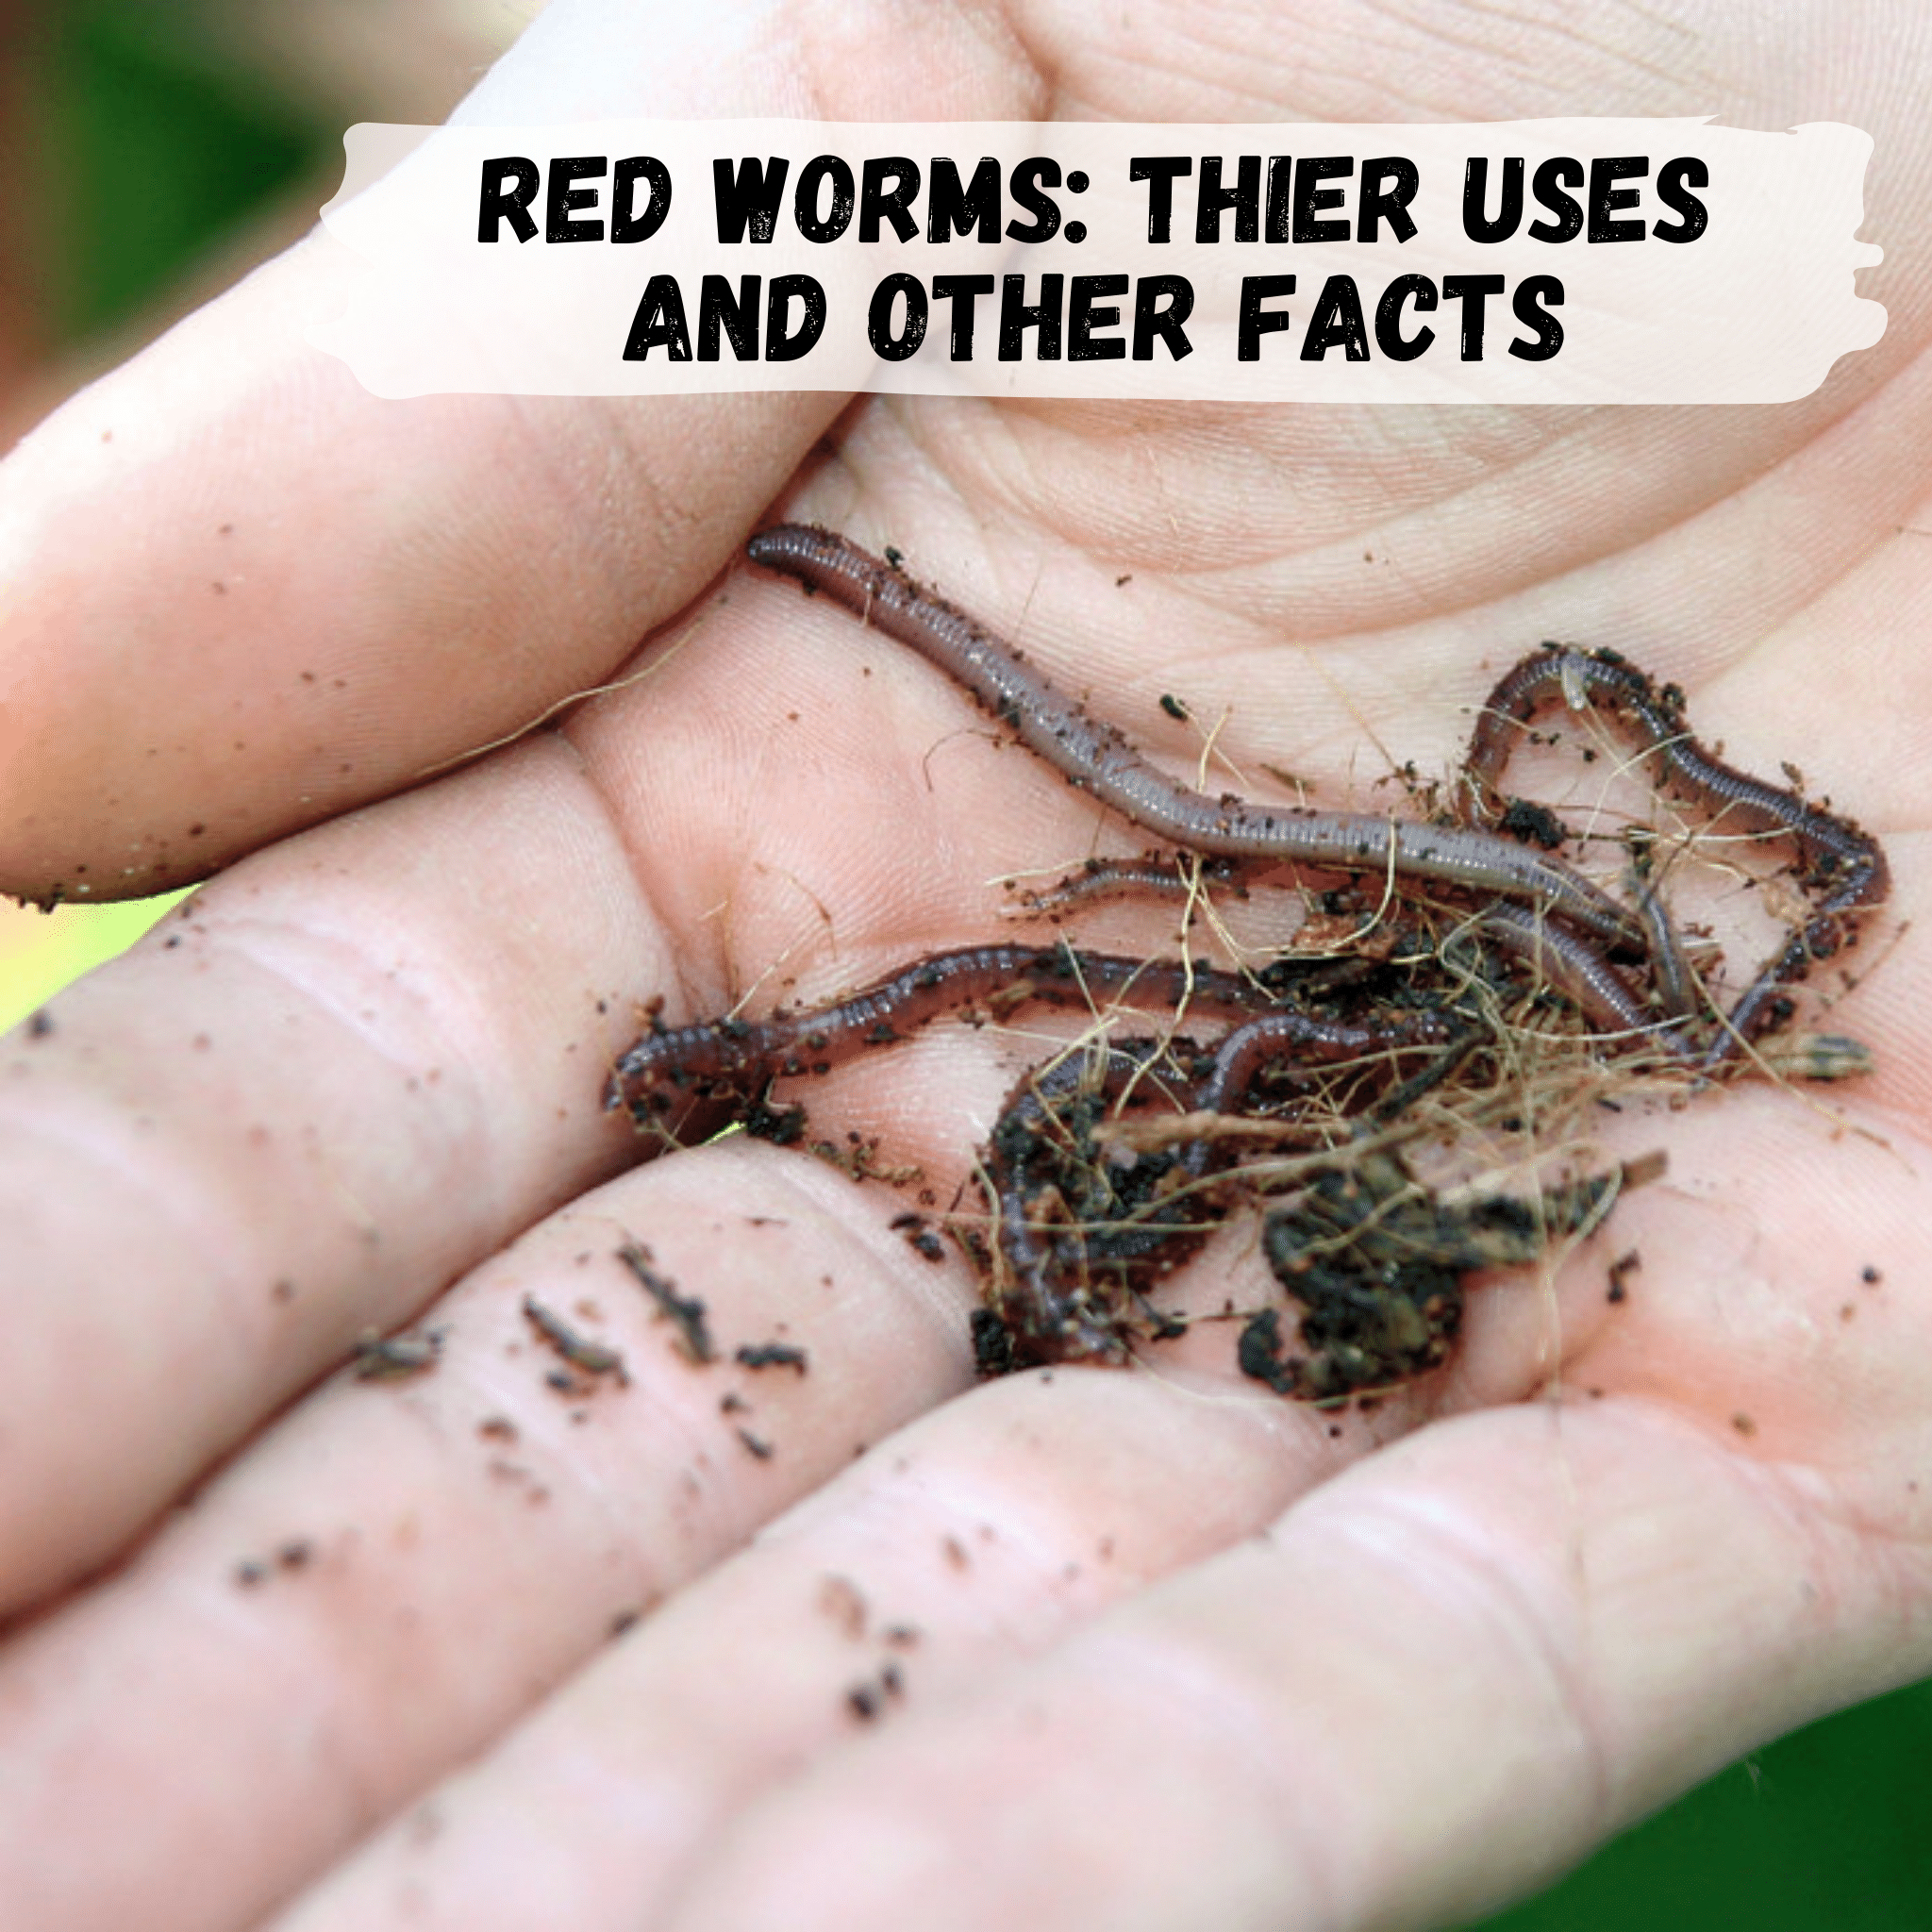 Red worms: Their uses and other facts – WormBucket